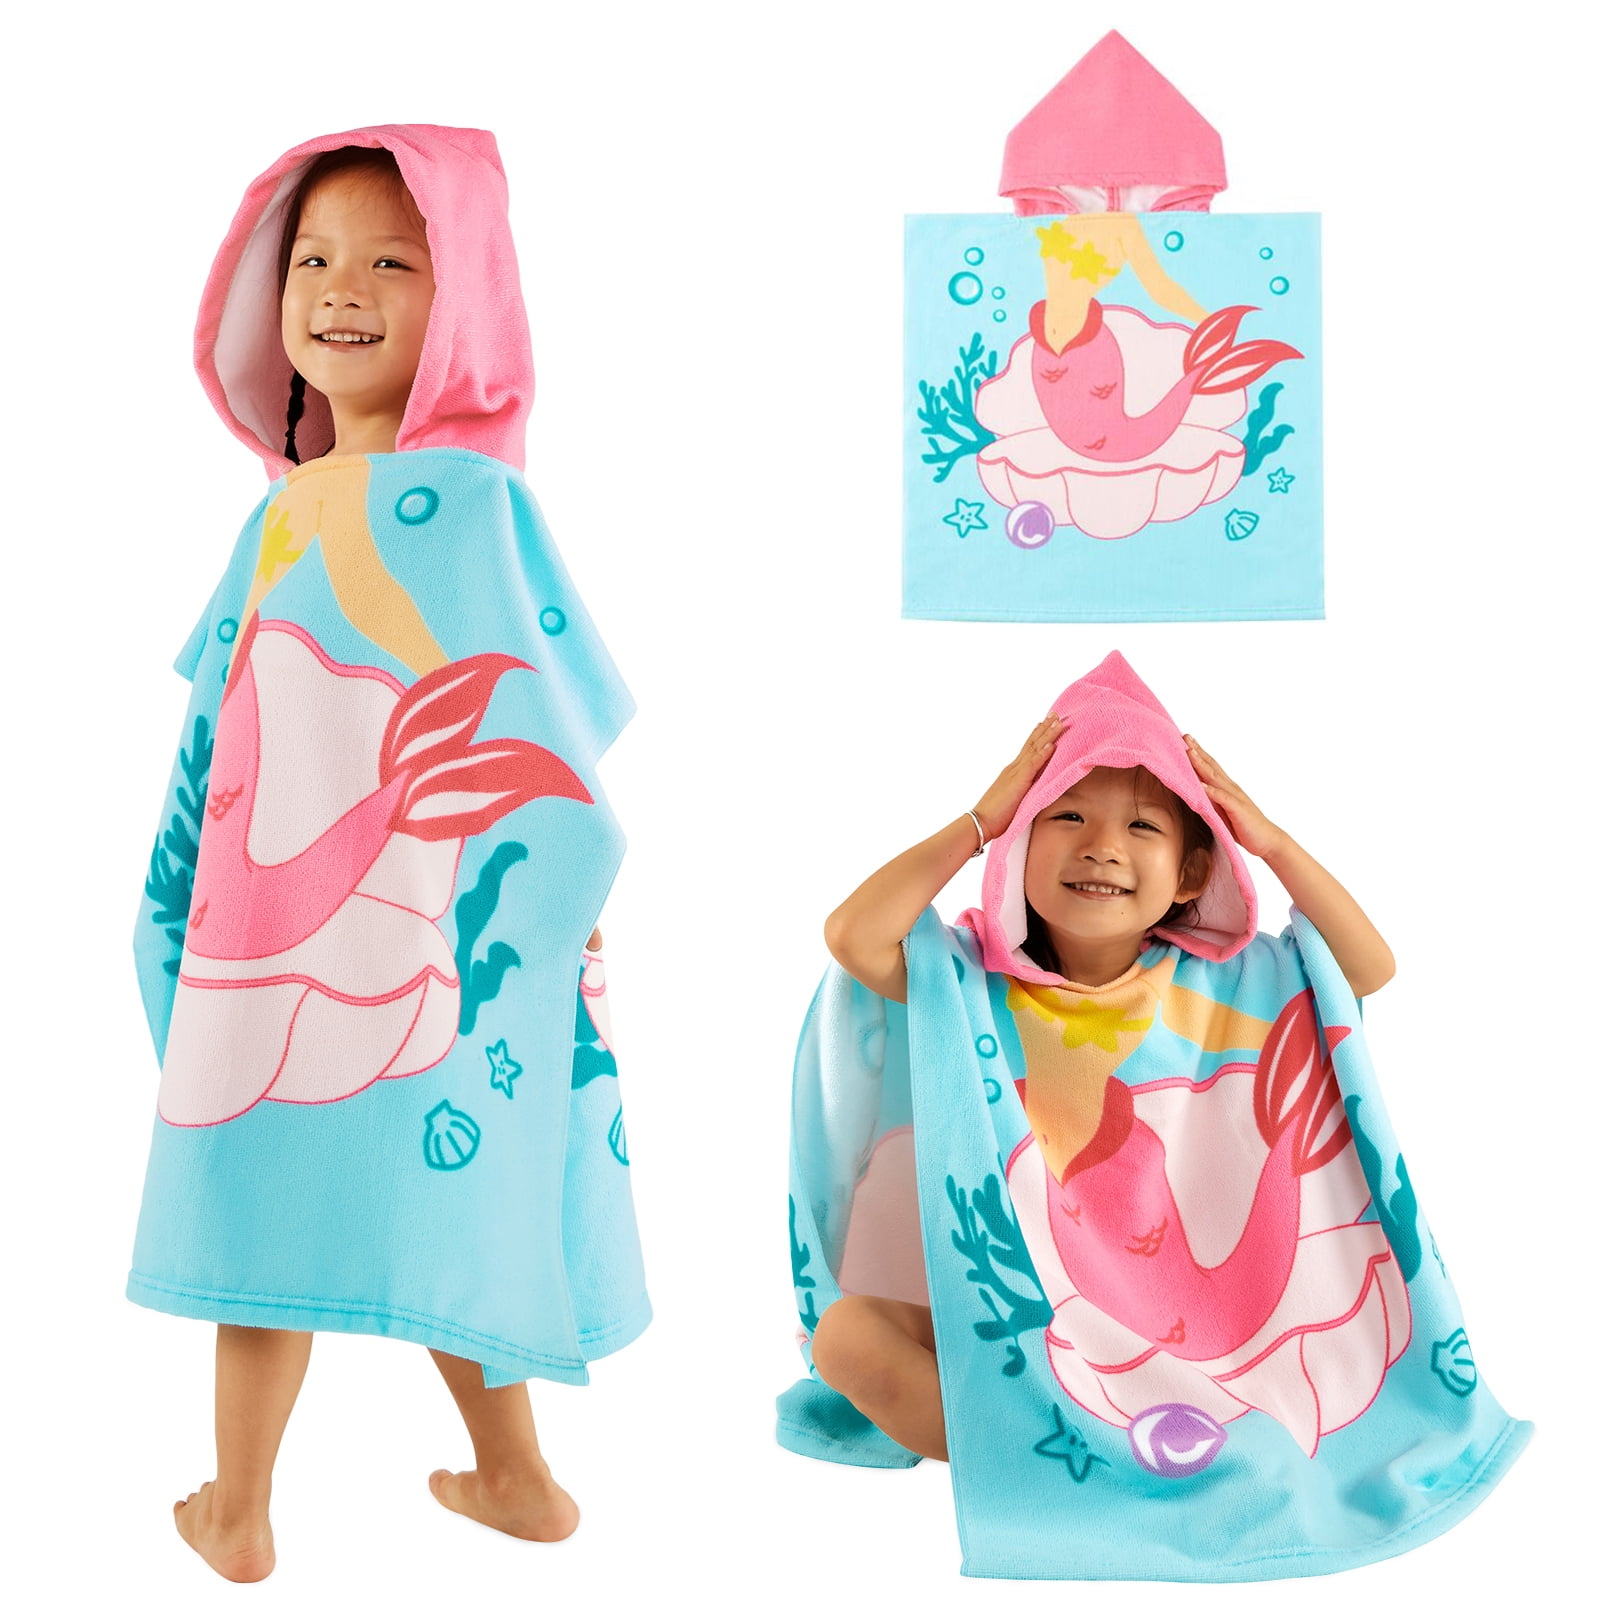 A2Z 4 Kids Towel Poncho Bathrobe 100% Cotton Red Soft Hooded Beach Bathing Surfing Watersports Robe Girls Boys Childrens Gift Years 2-13 Swimming